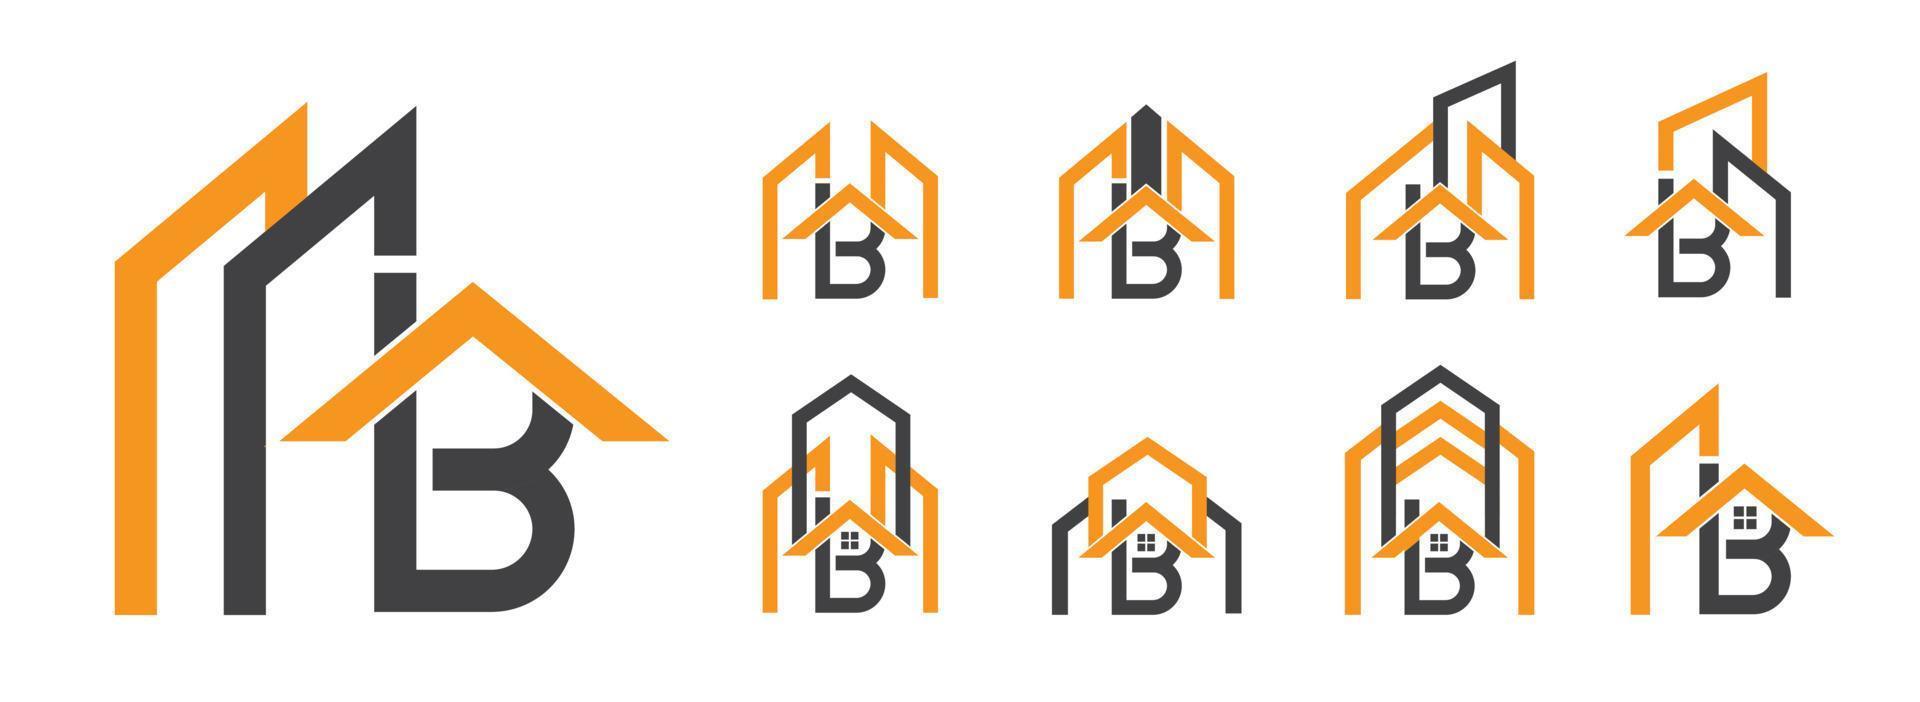 Letter B logo for contracting, engineering, real estate vector